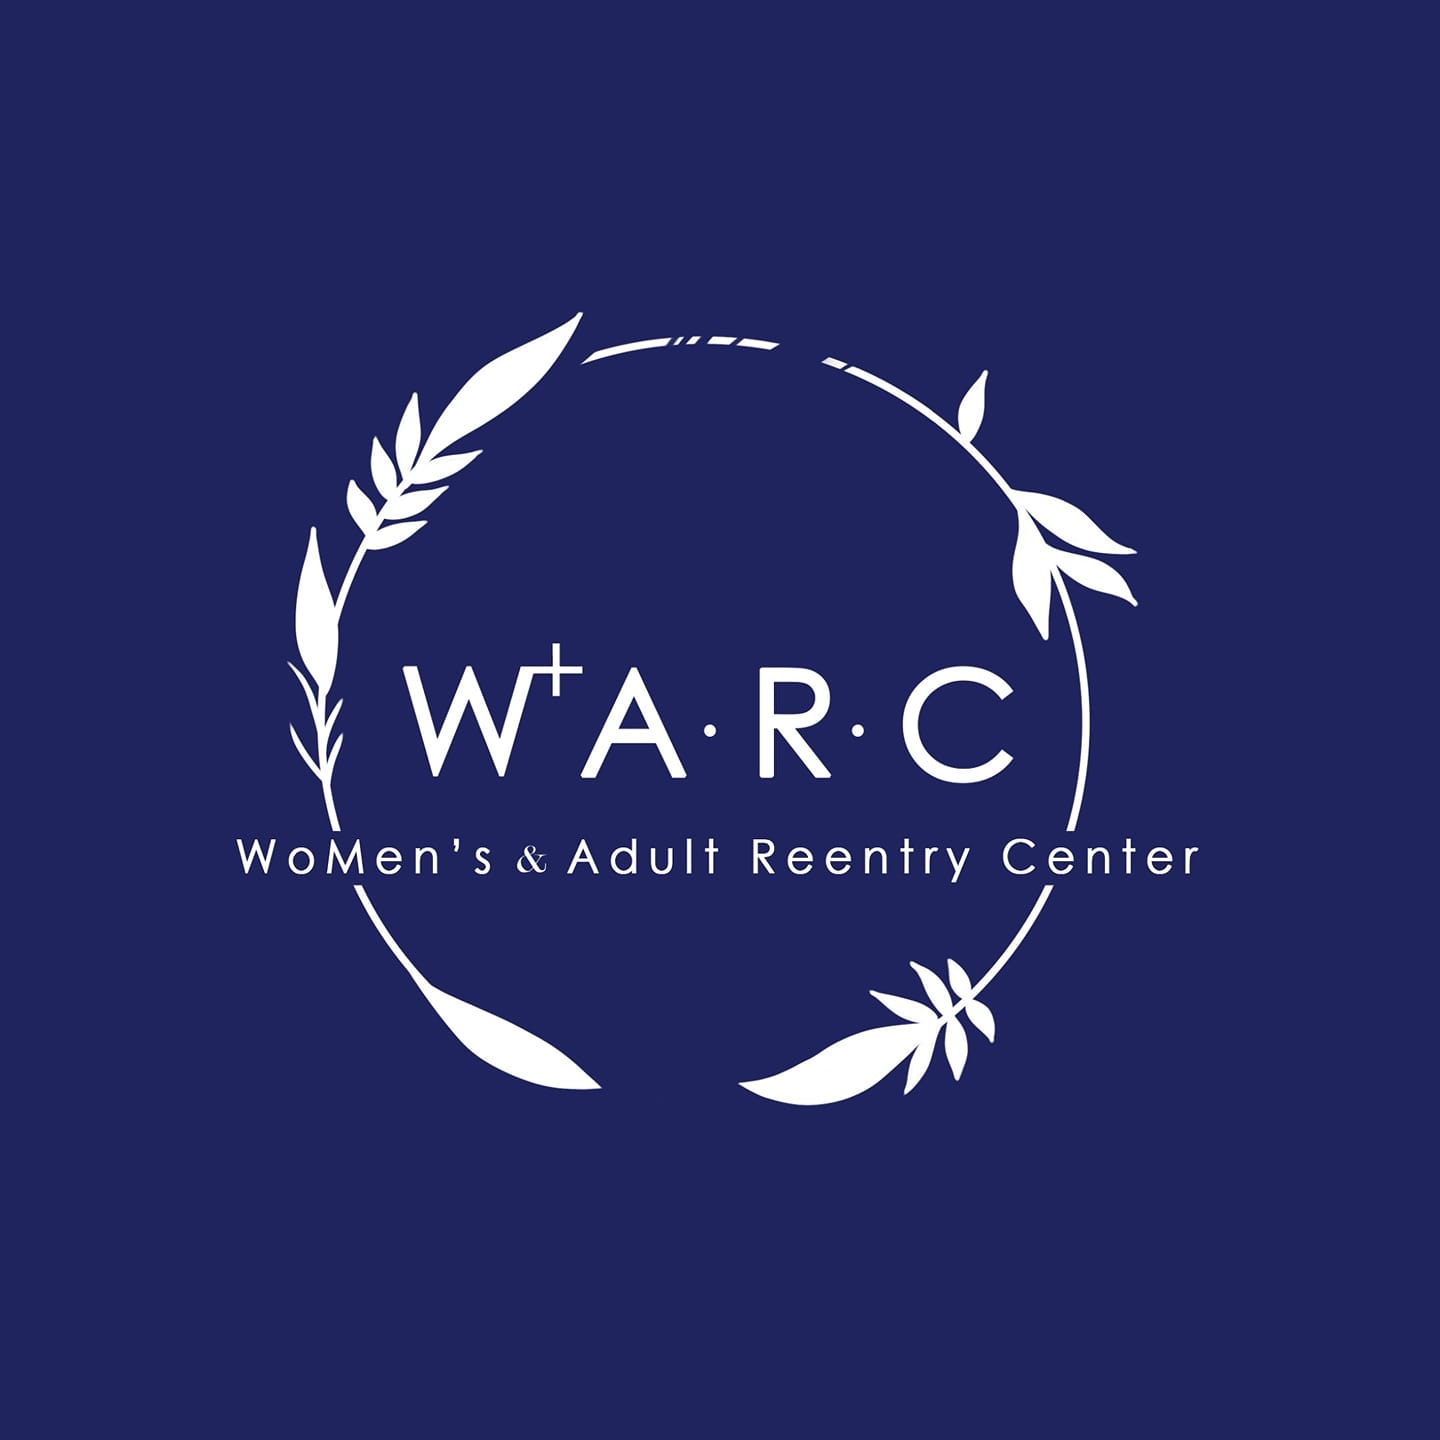 Women and Adult Reentry center logo